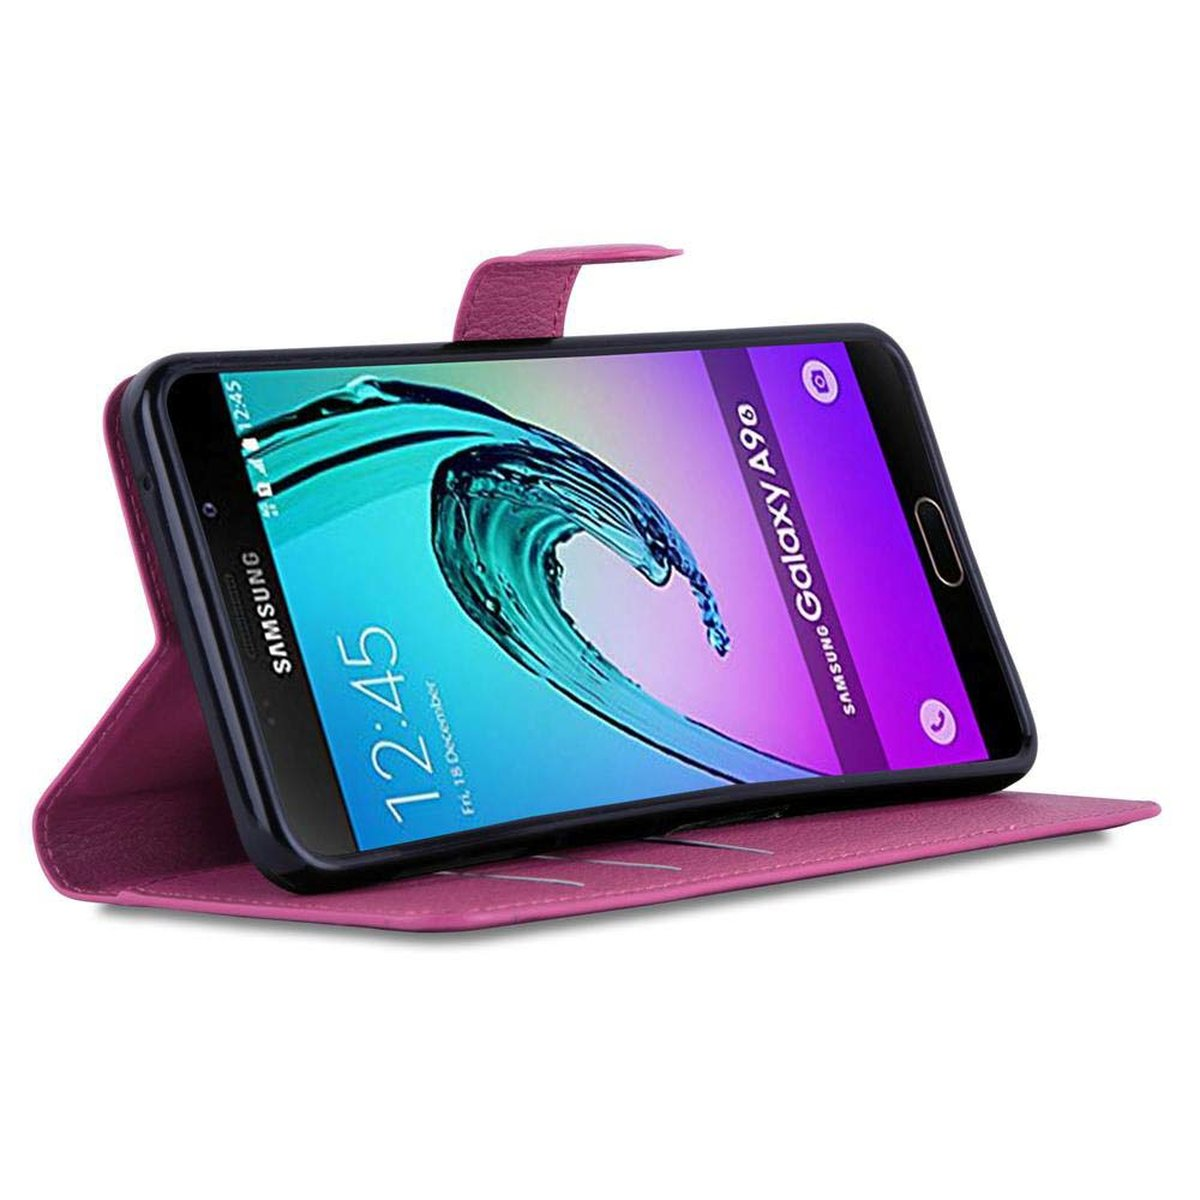 A9 Samsung, Galaxy PINK Book CADORABO 2016, Hülle Standfunktion, Bookcover, CHERRY